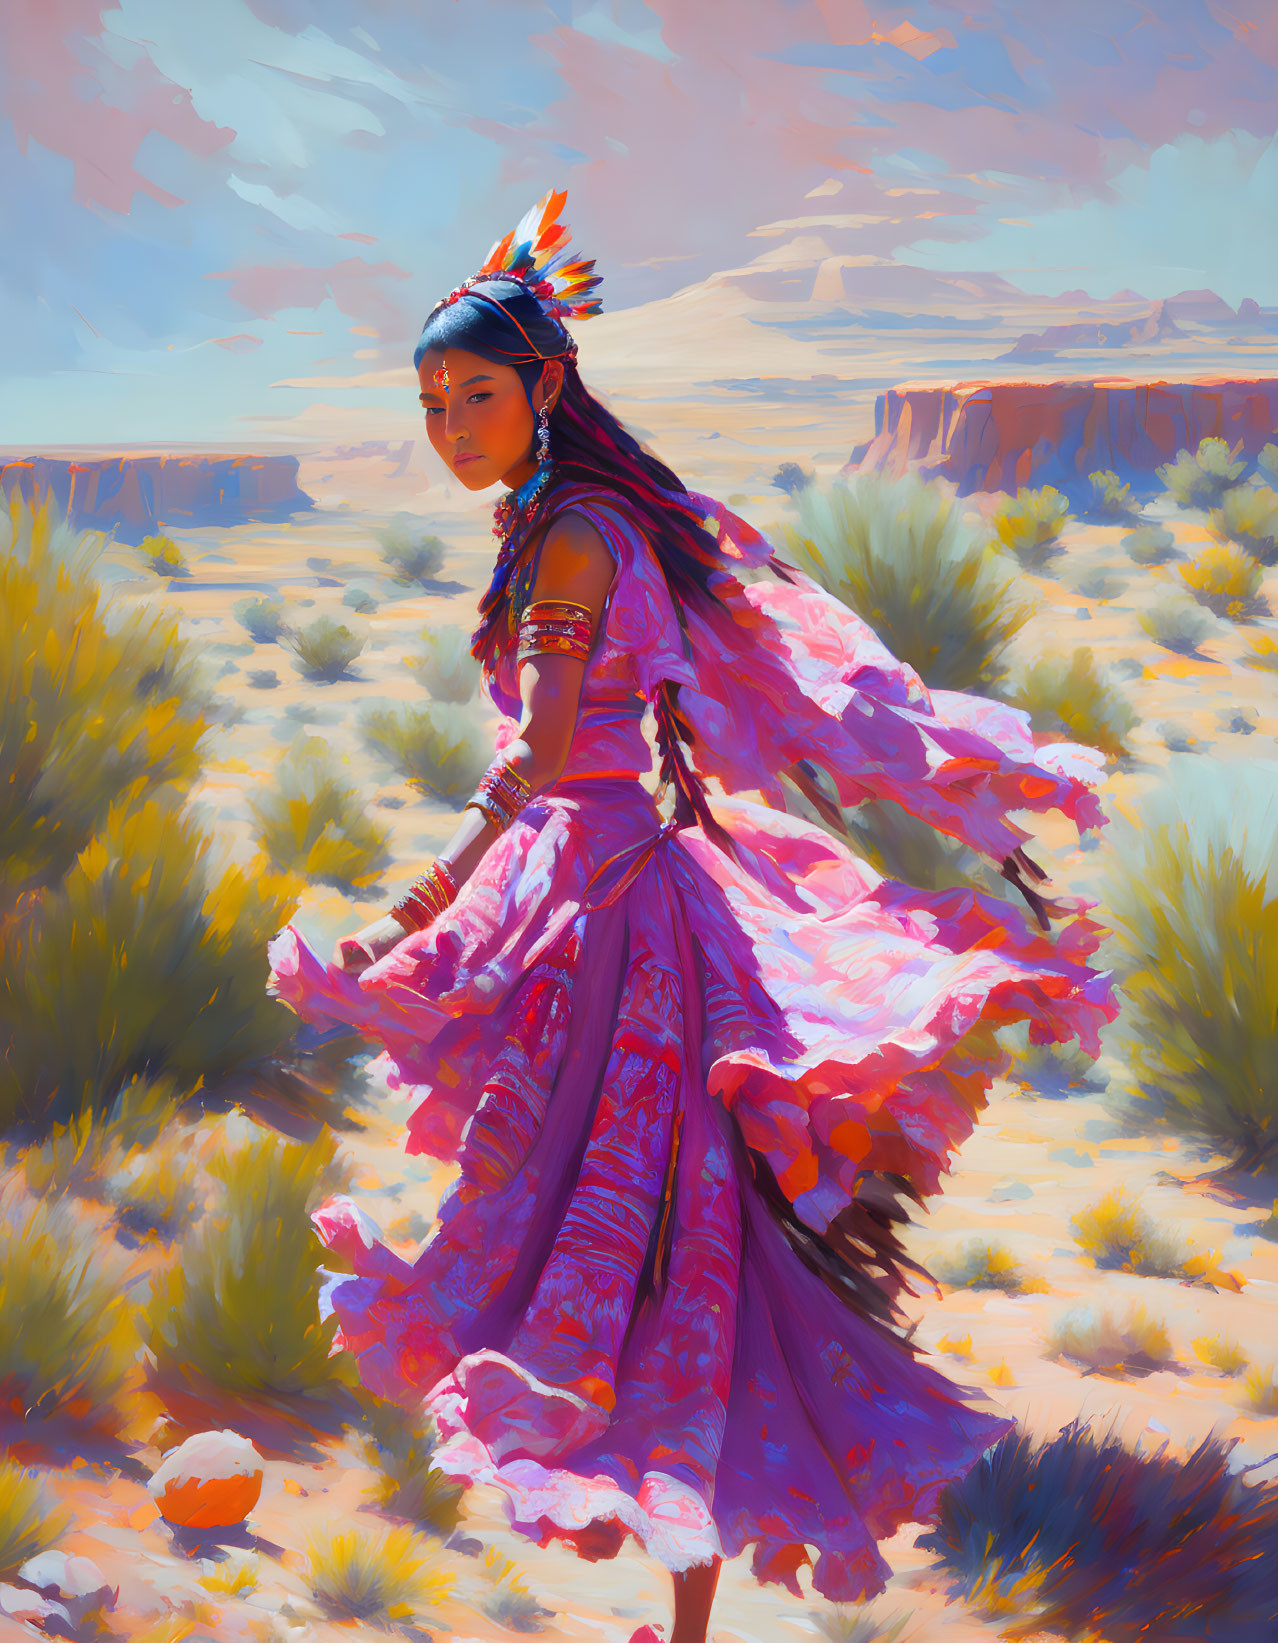 Native American woman dances in desert landscape with feather headdress.